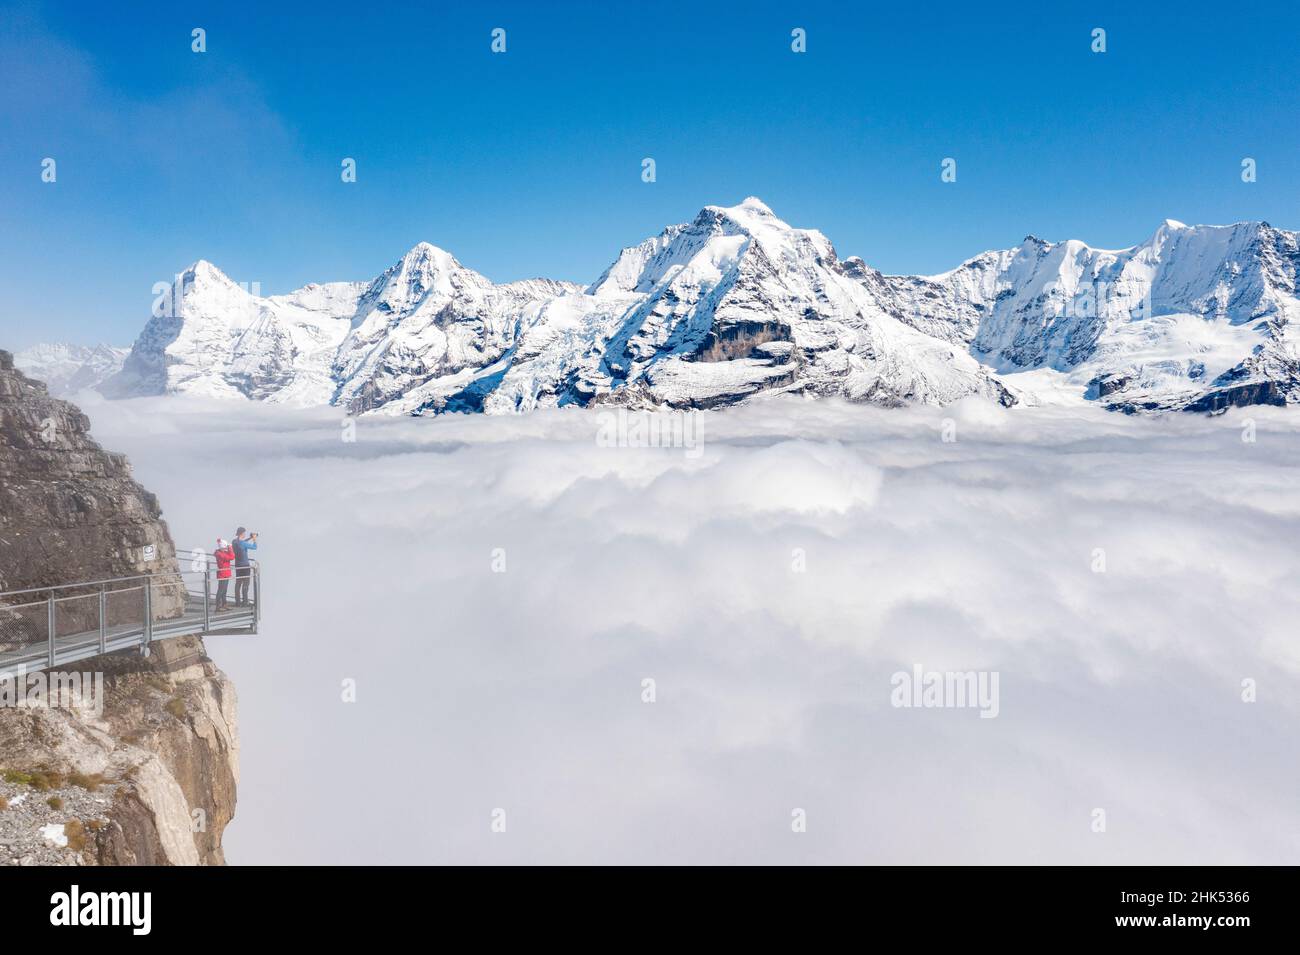 Two people photographing snowcapped Eiger and Monch peaks in fog from elevated walkway, Murren Birg, Bern canton, Swiss Alps, Switzerland, Europe Stock Photo